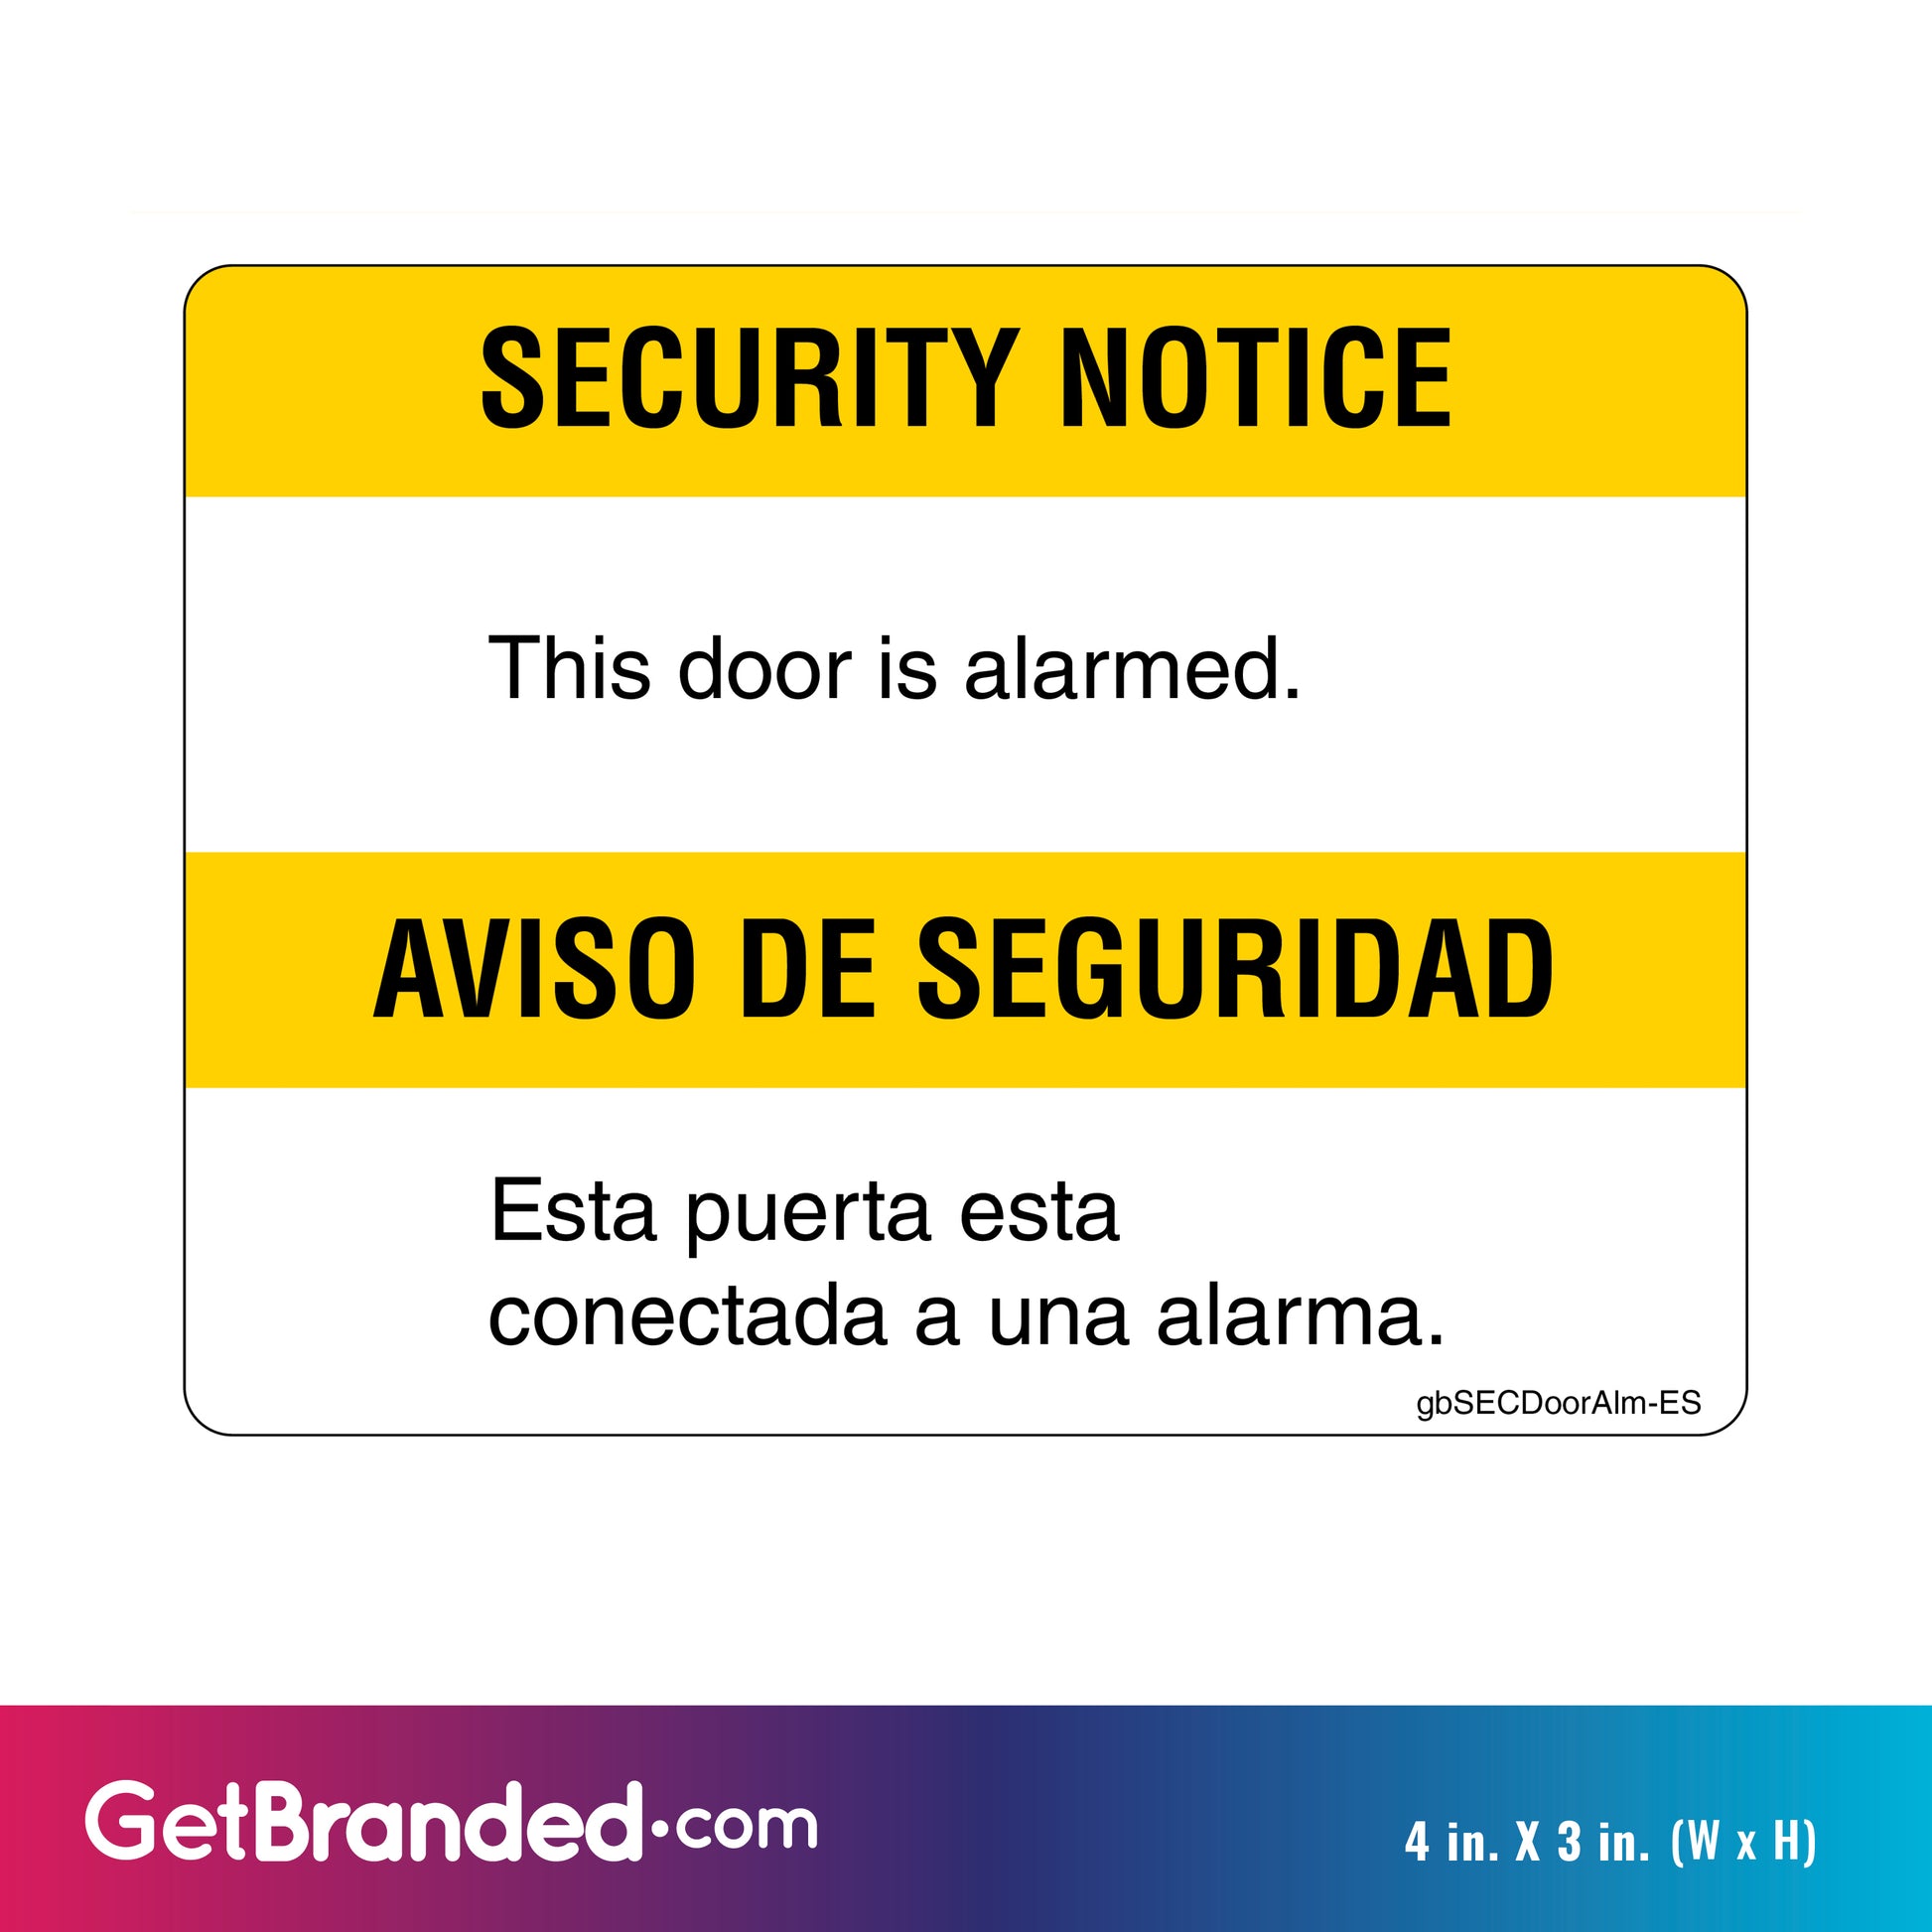 Security Notice, This Door Alarmed Decal in English and Spanish. 4 inches by 3 inches in size.